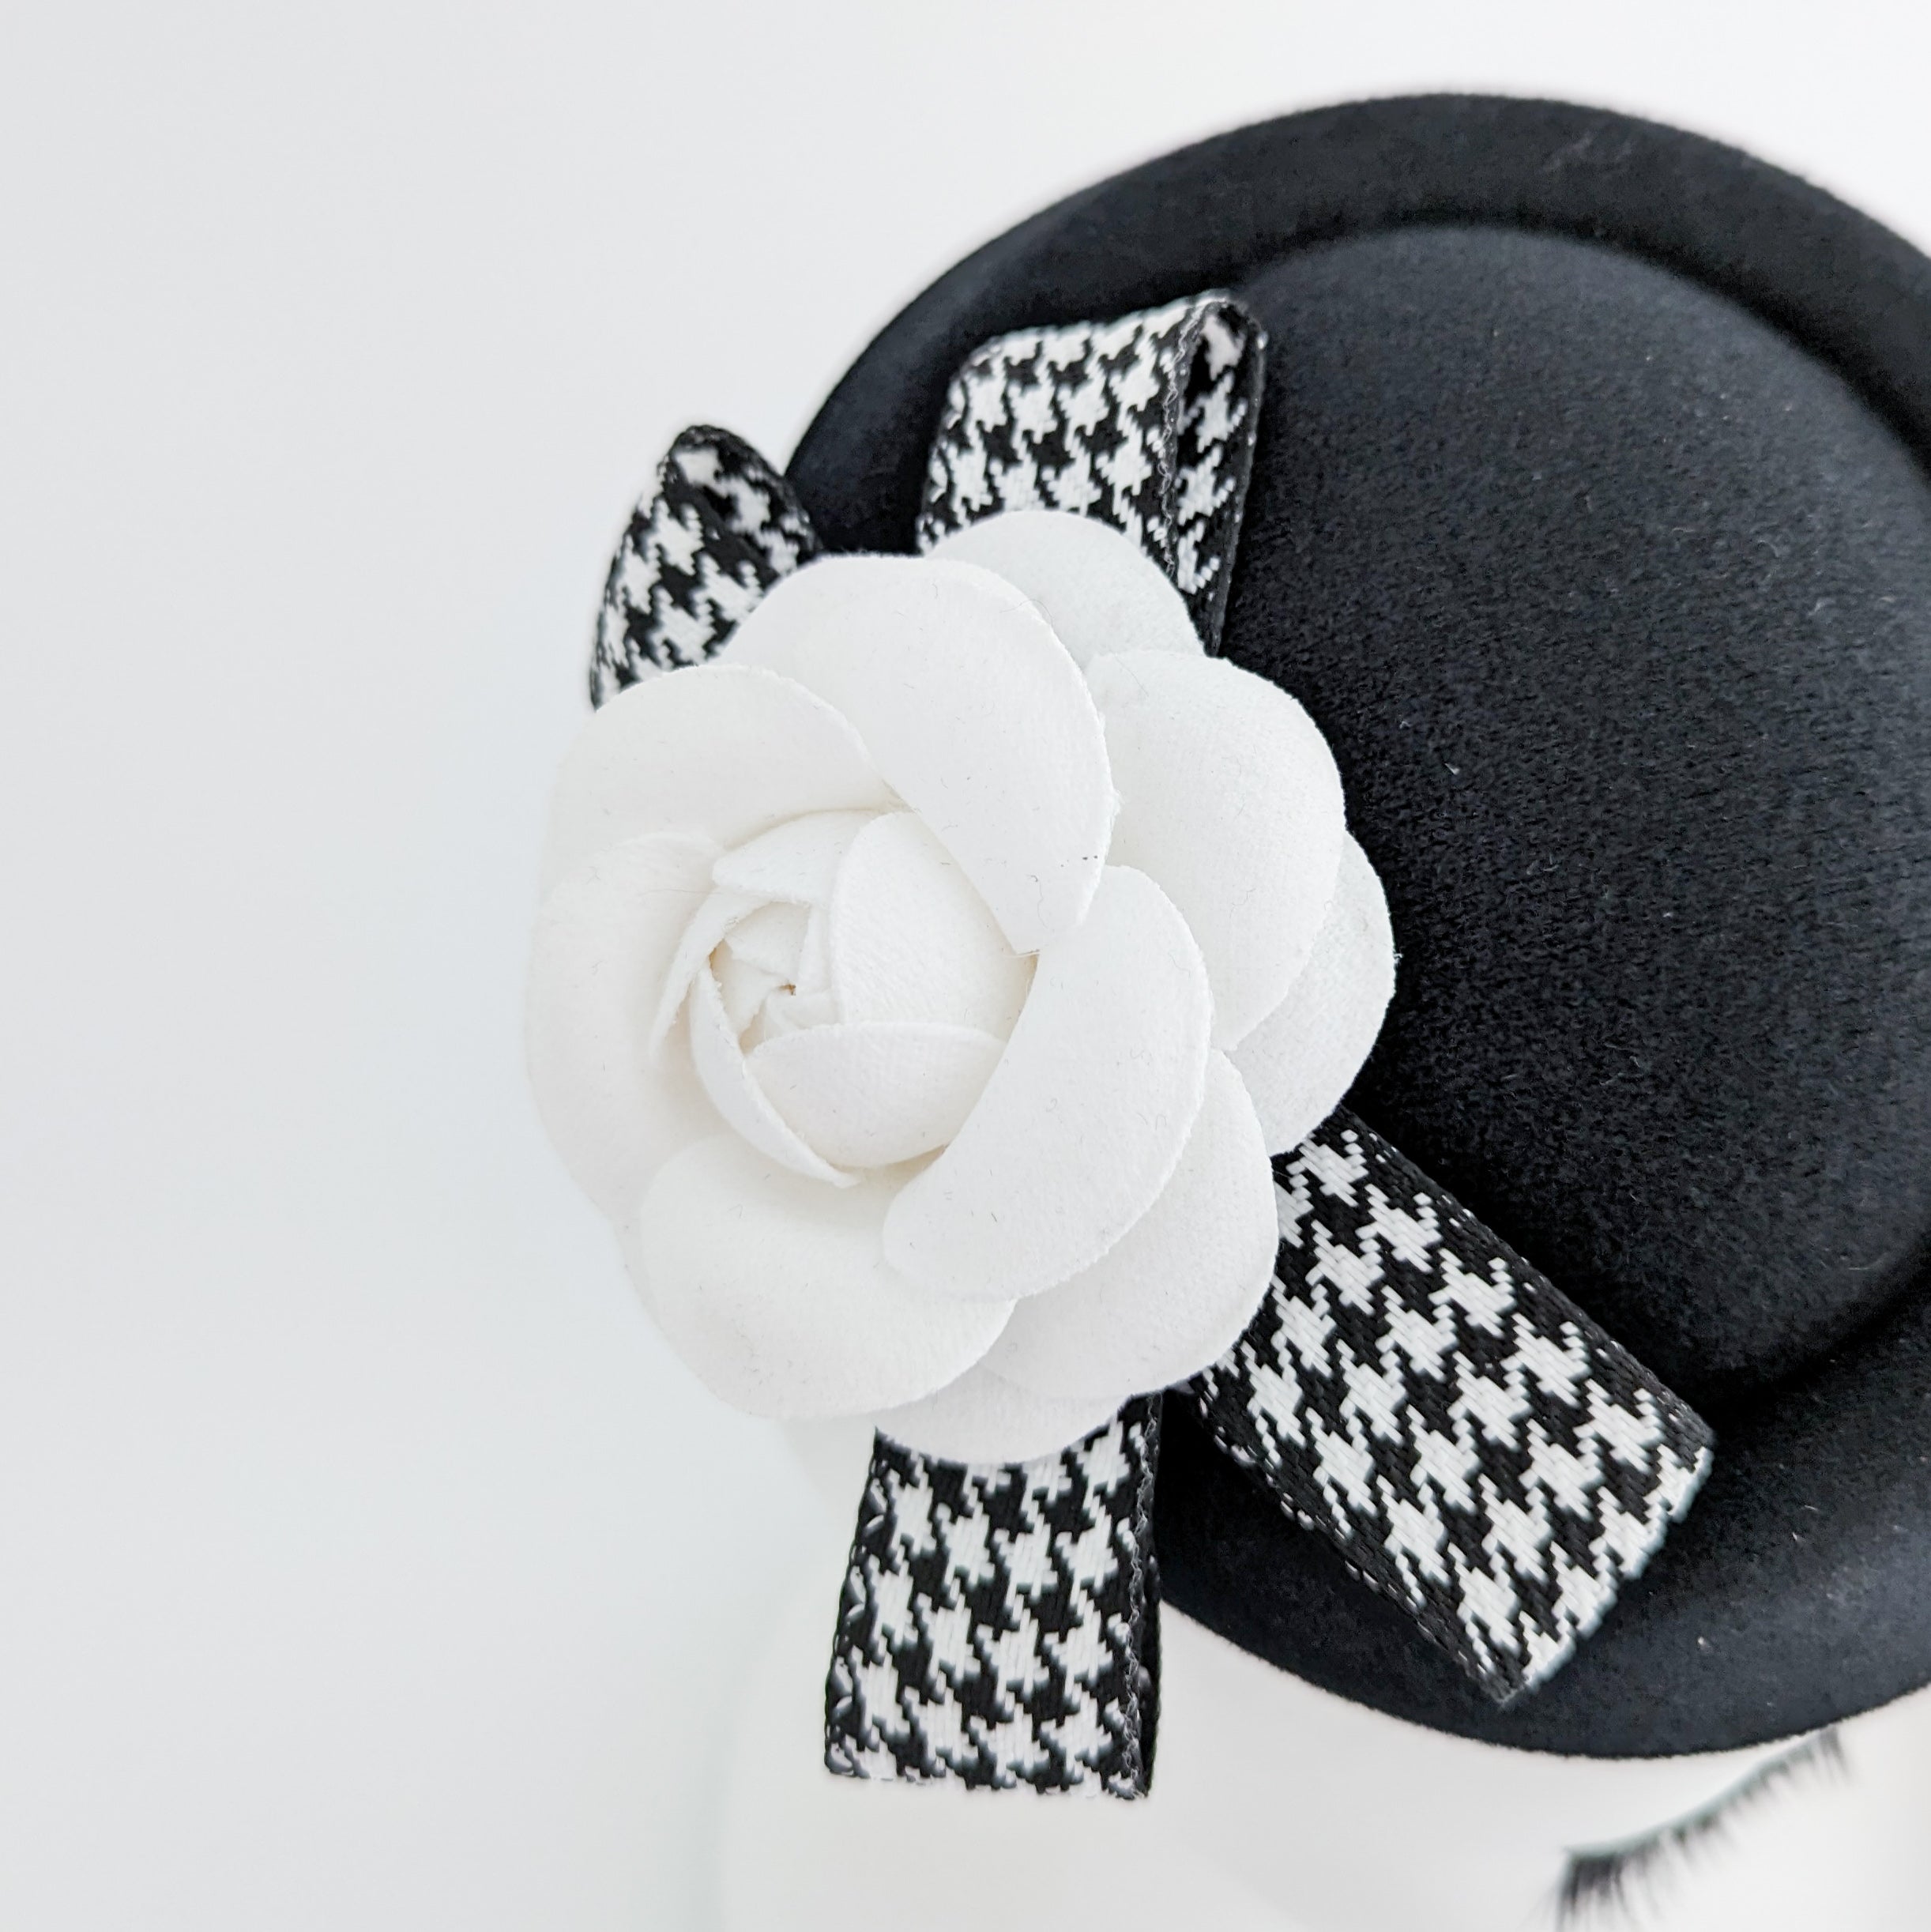 Black and white camellia flower small pillbox fascinator hat